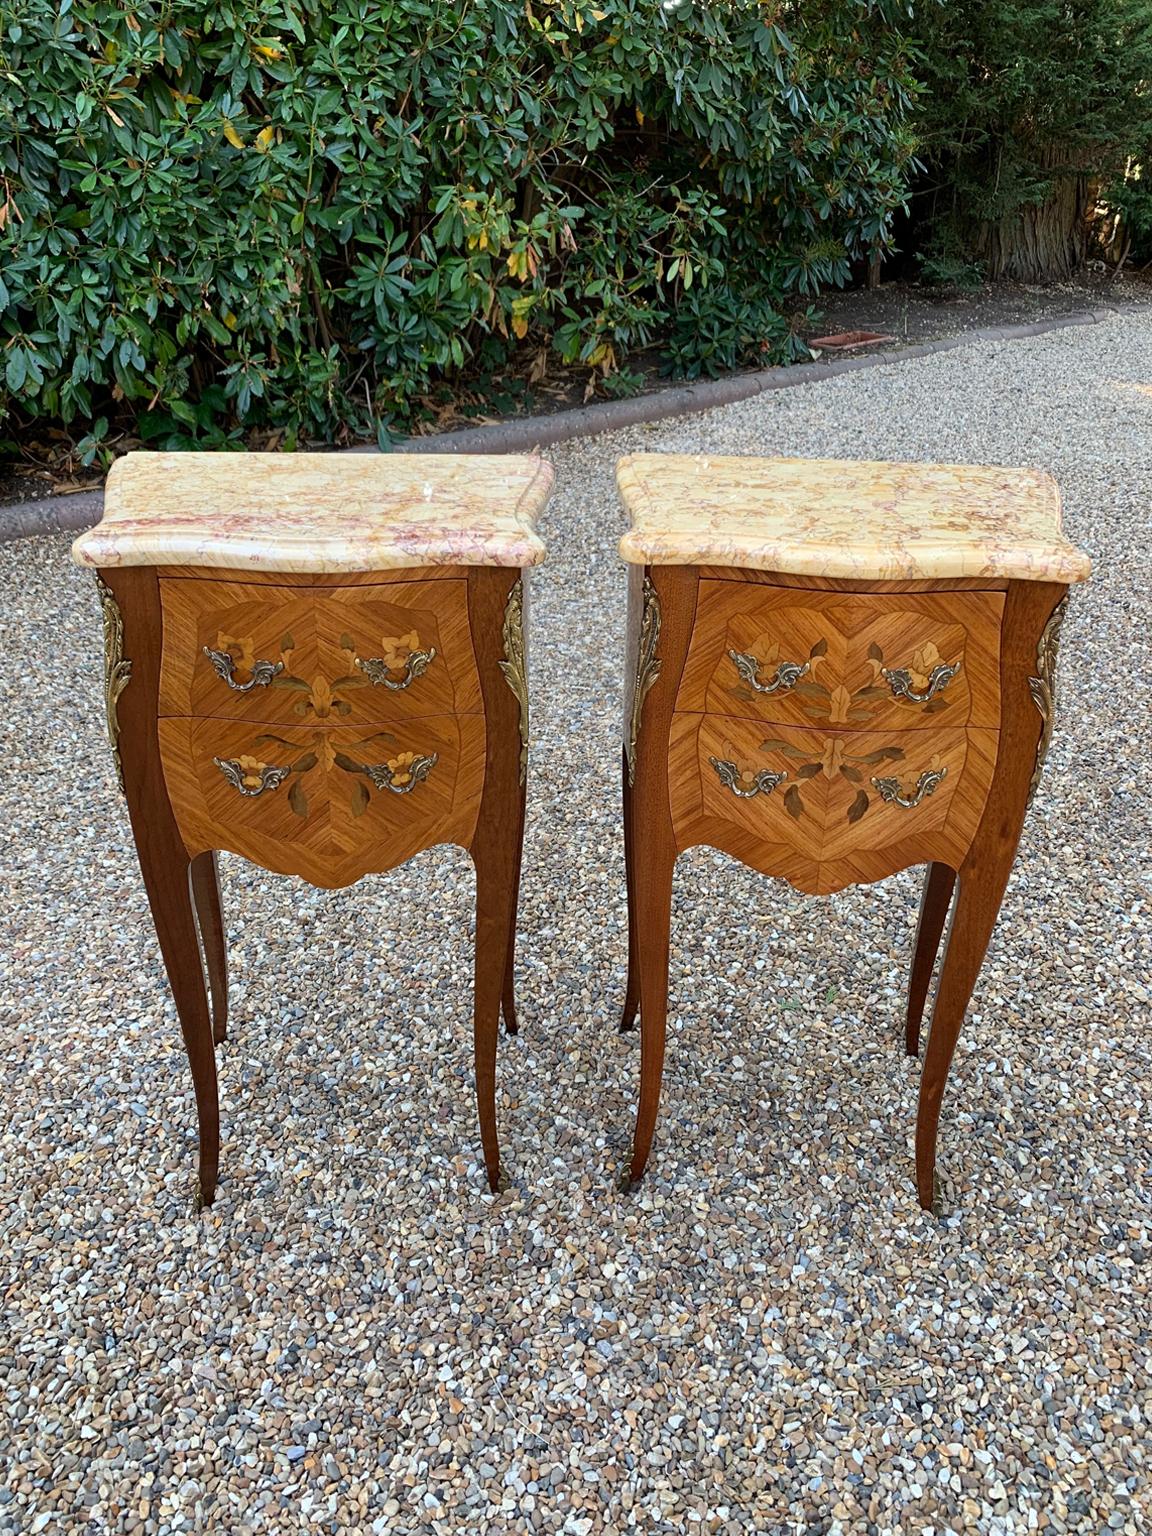 A Pair of Edwardian / 1920’s French Walnut & Kingwood floral inlaid Serpentine Bedsides of bombé form, each inset with a solid Marble Tops, above two fitted drawers and gilt metal mounts.

Circa: 1900 / 1920

Dimensions:
height: 30 inches – 76